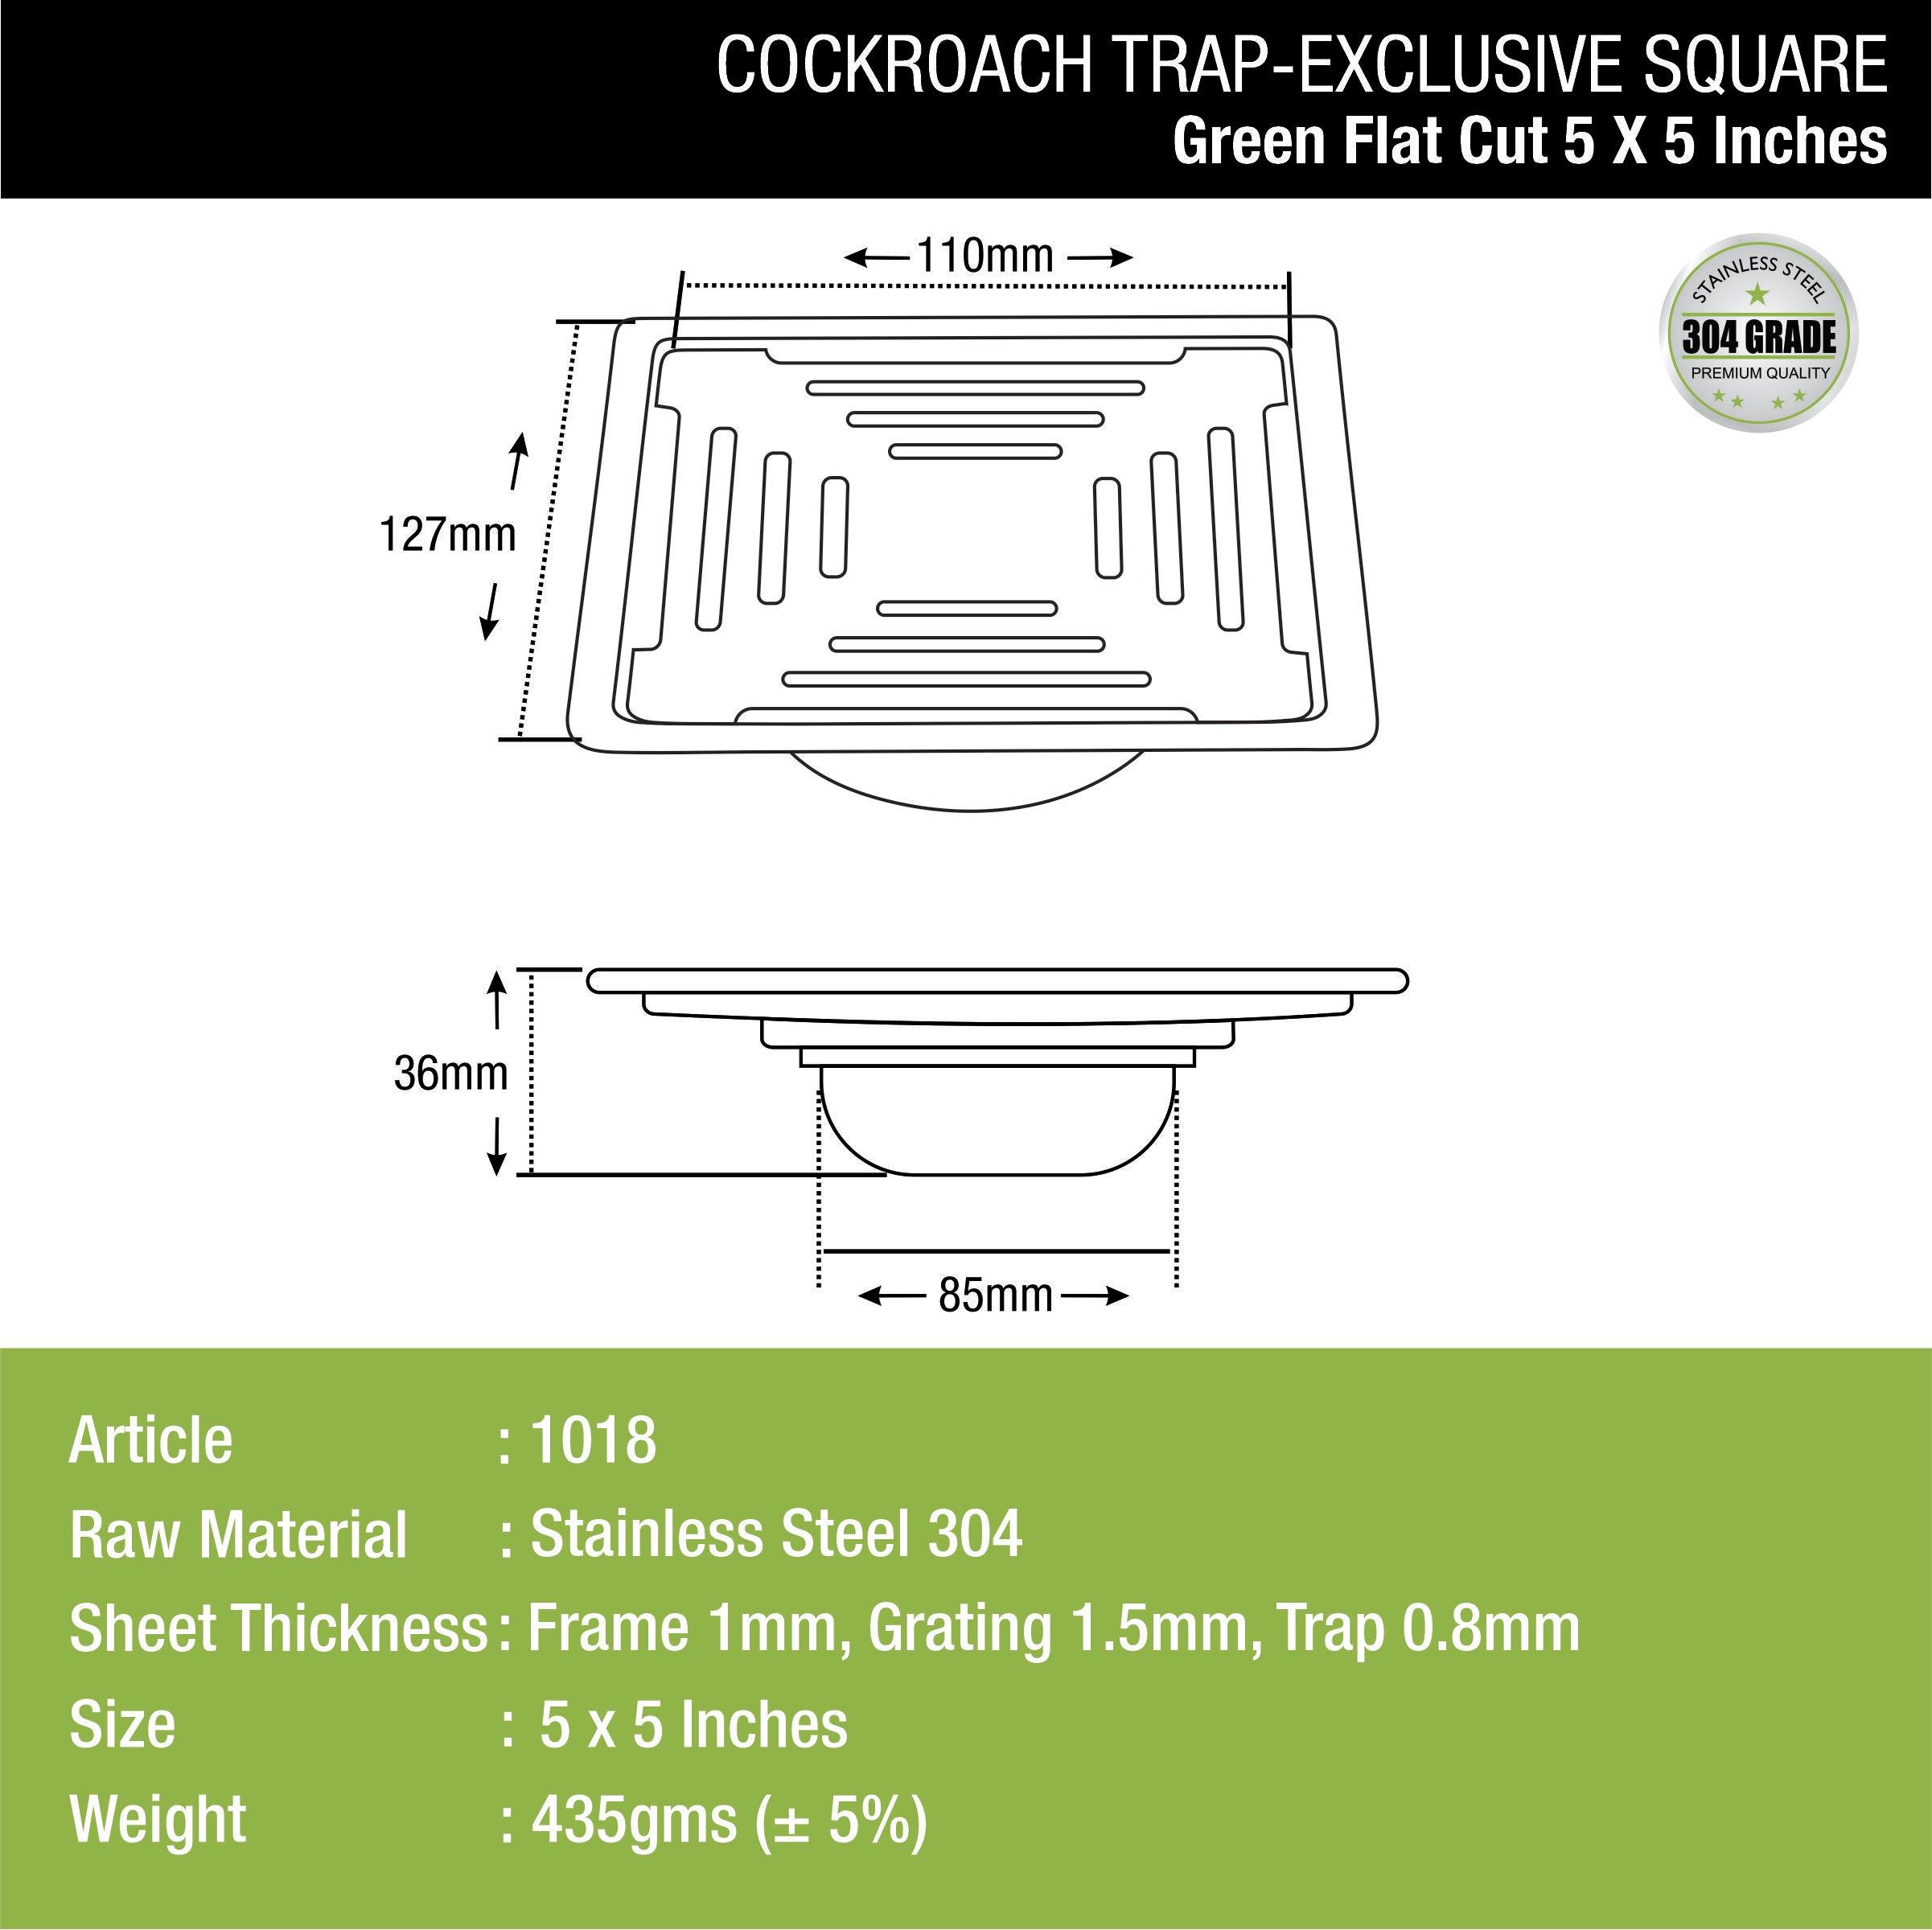 Green Exclusive Square Flat Cut Floor Drain (5 x 5 Inches) with Cockroach Trap dimensions and sizes